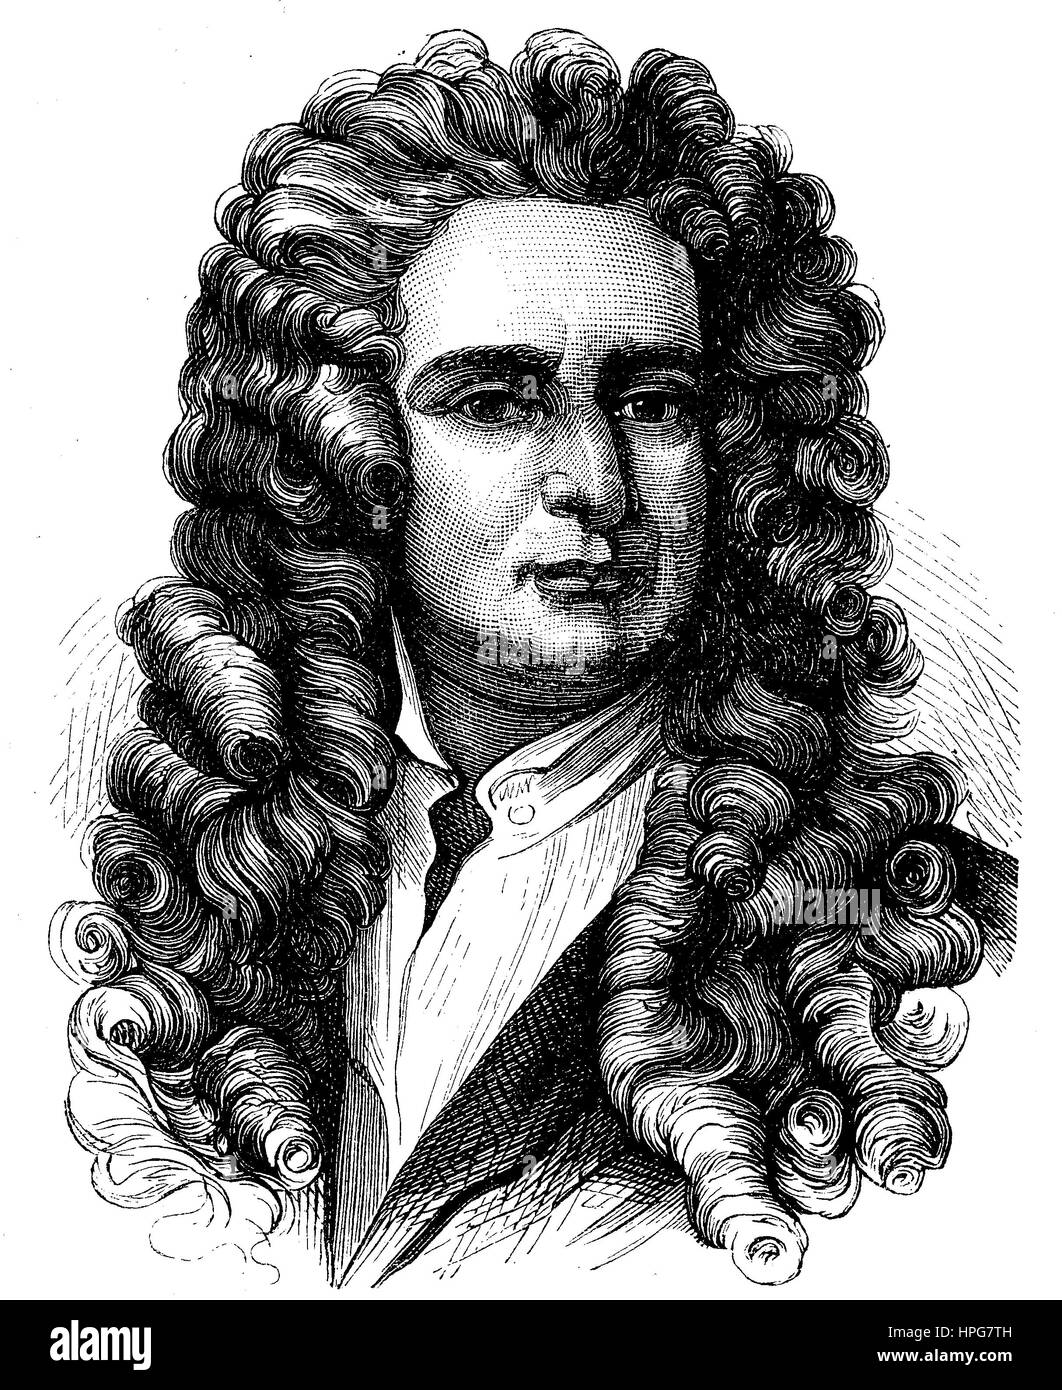 1600s ENGRAVING OF SIR ISAAC NEWTON AS YOUNG MAN SITTING UNDER